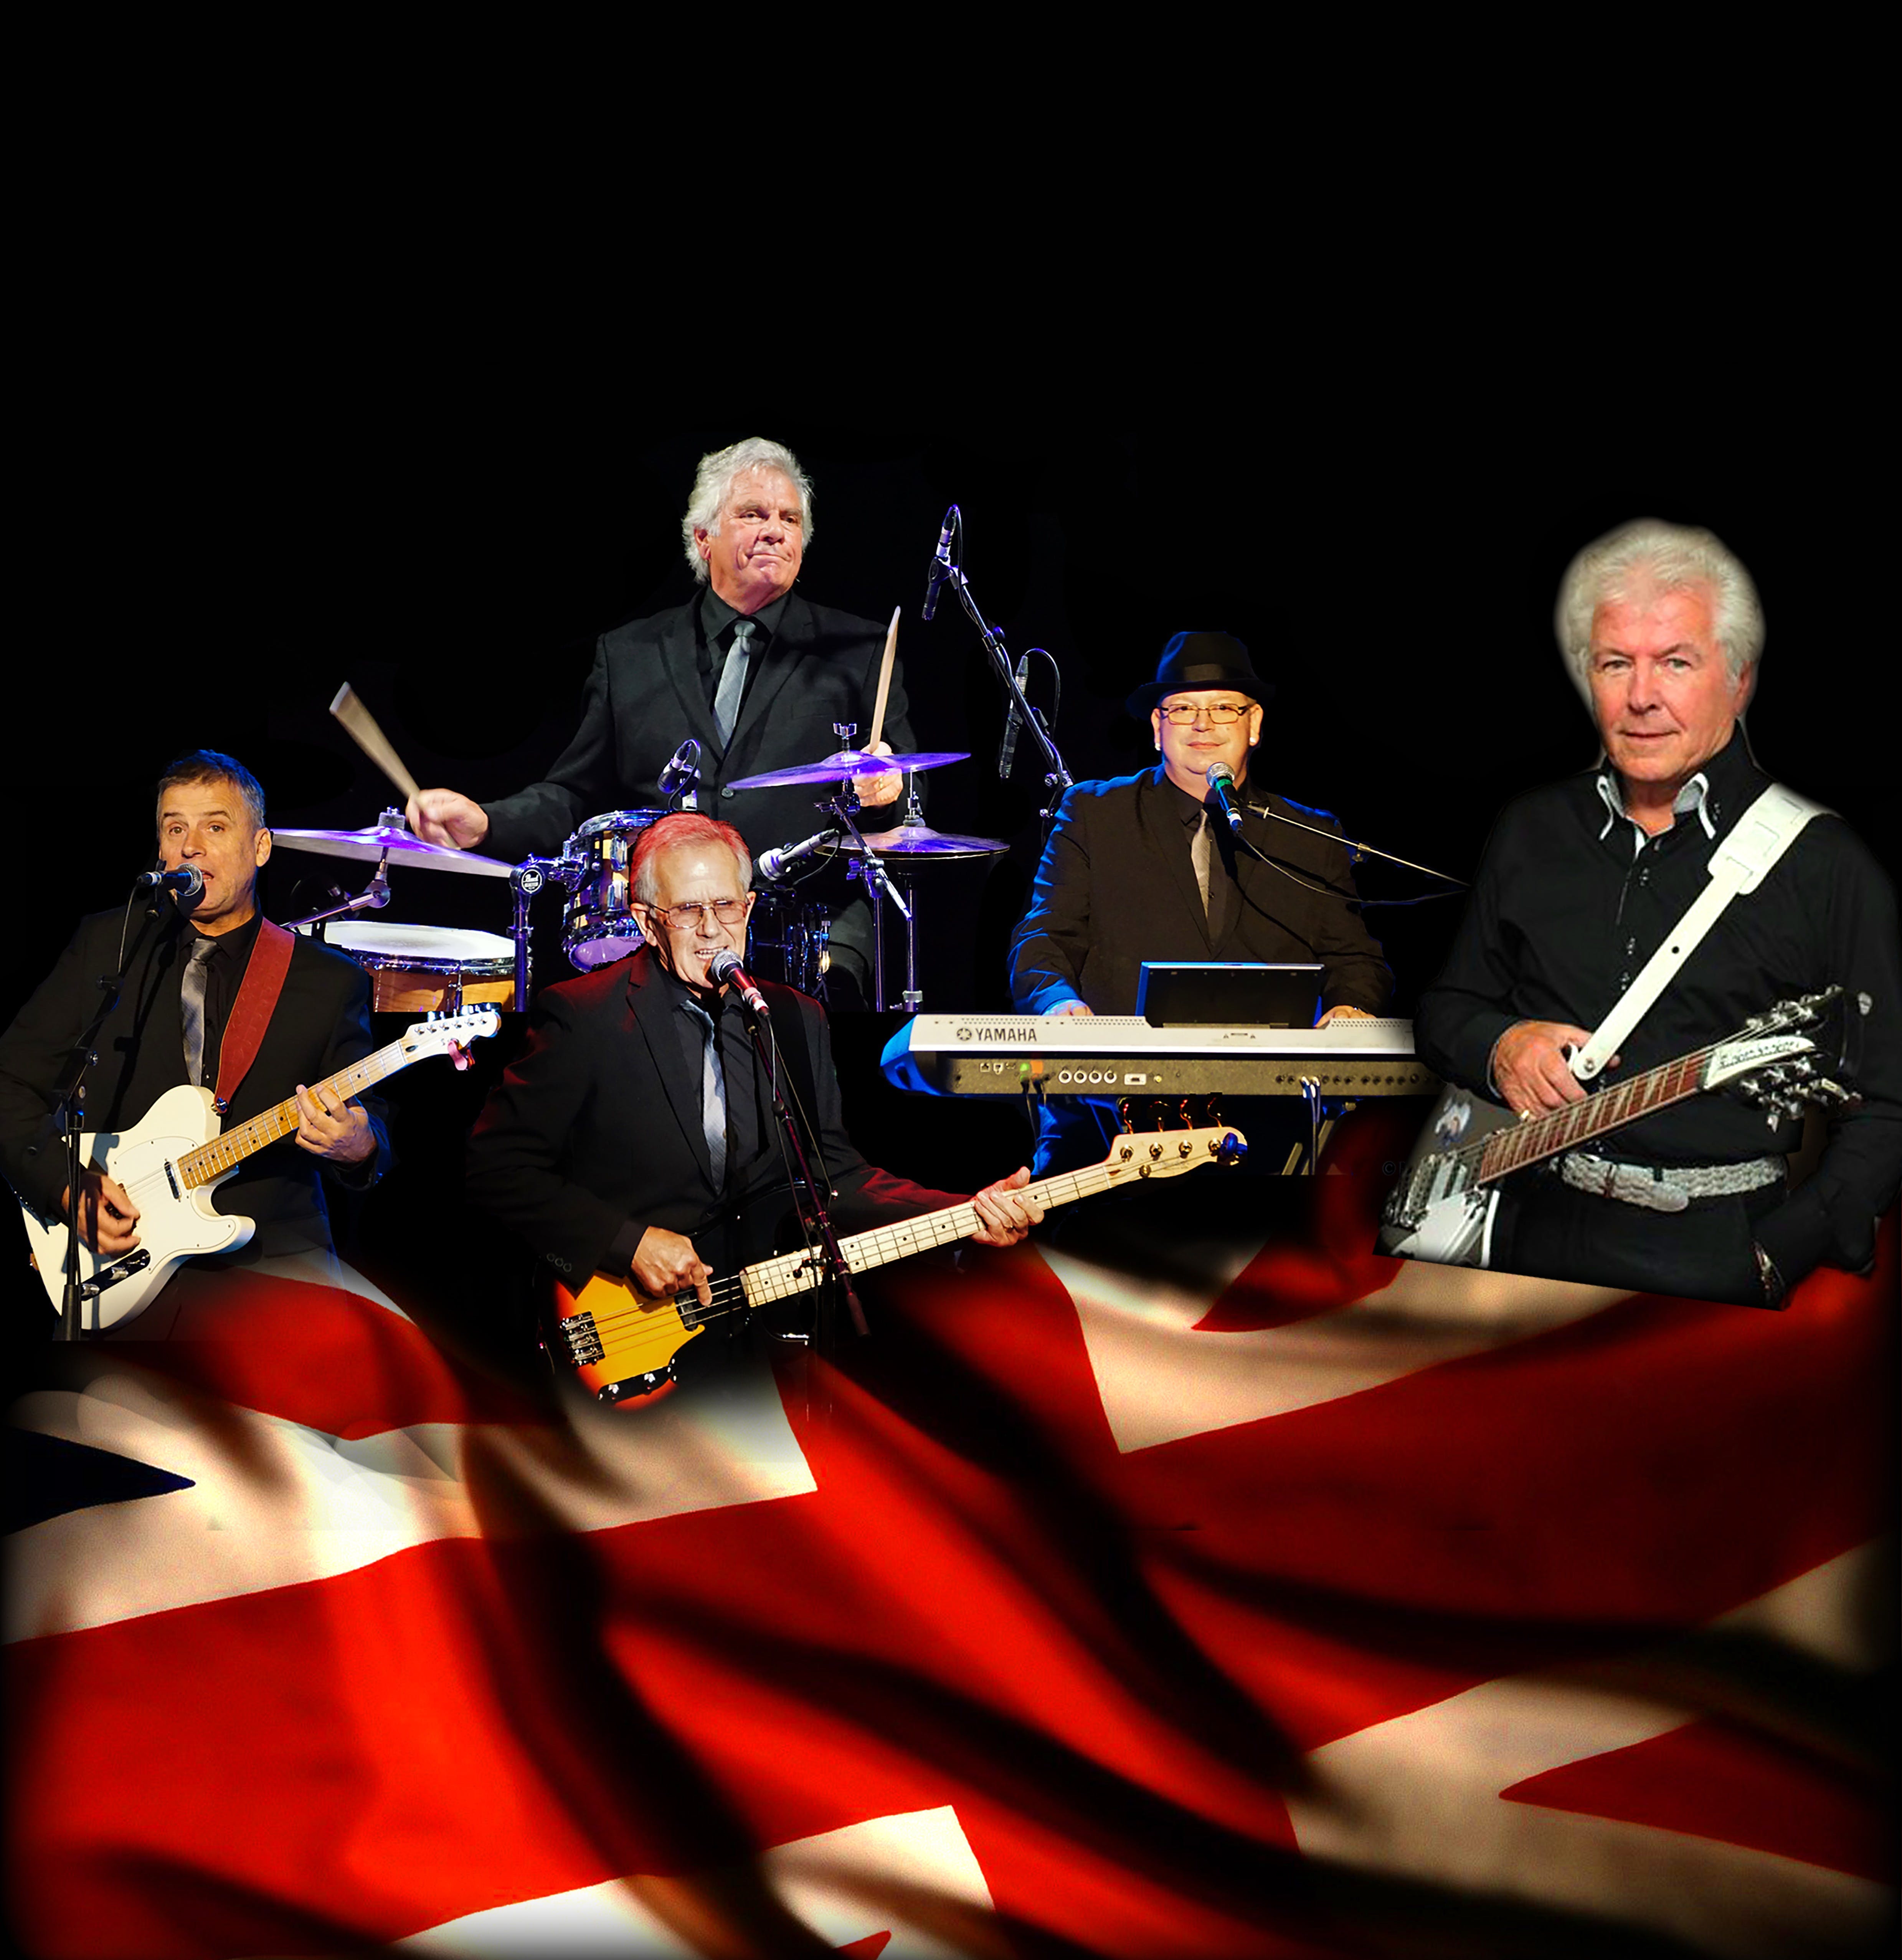 Herman's Hermits with Special Guest Mike Pender - The Six O'Clock Hop - Restaurants Sydney